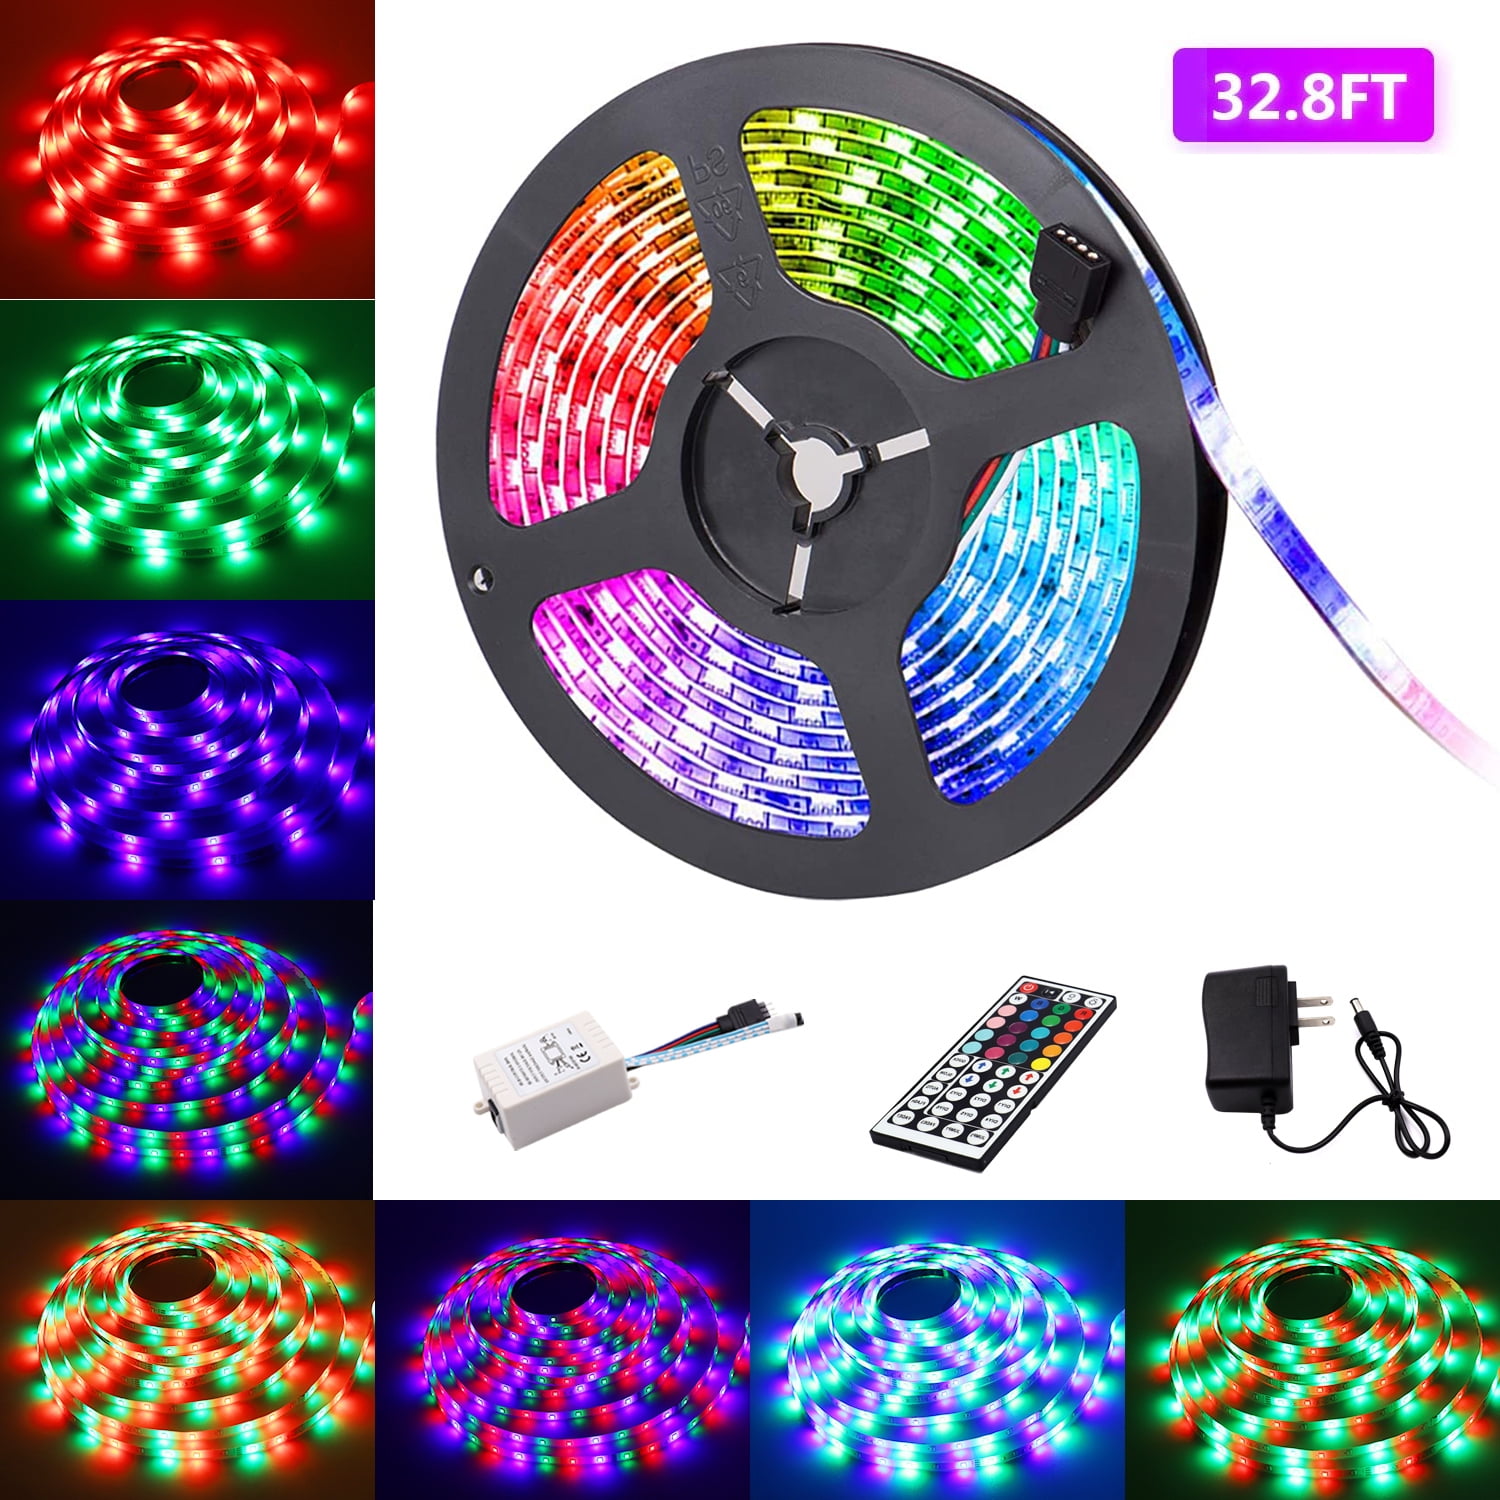 LED Strip Light Waterproof 300 LED Rope Light With Remote Controller 16.4 Ft NEW 